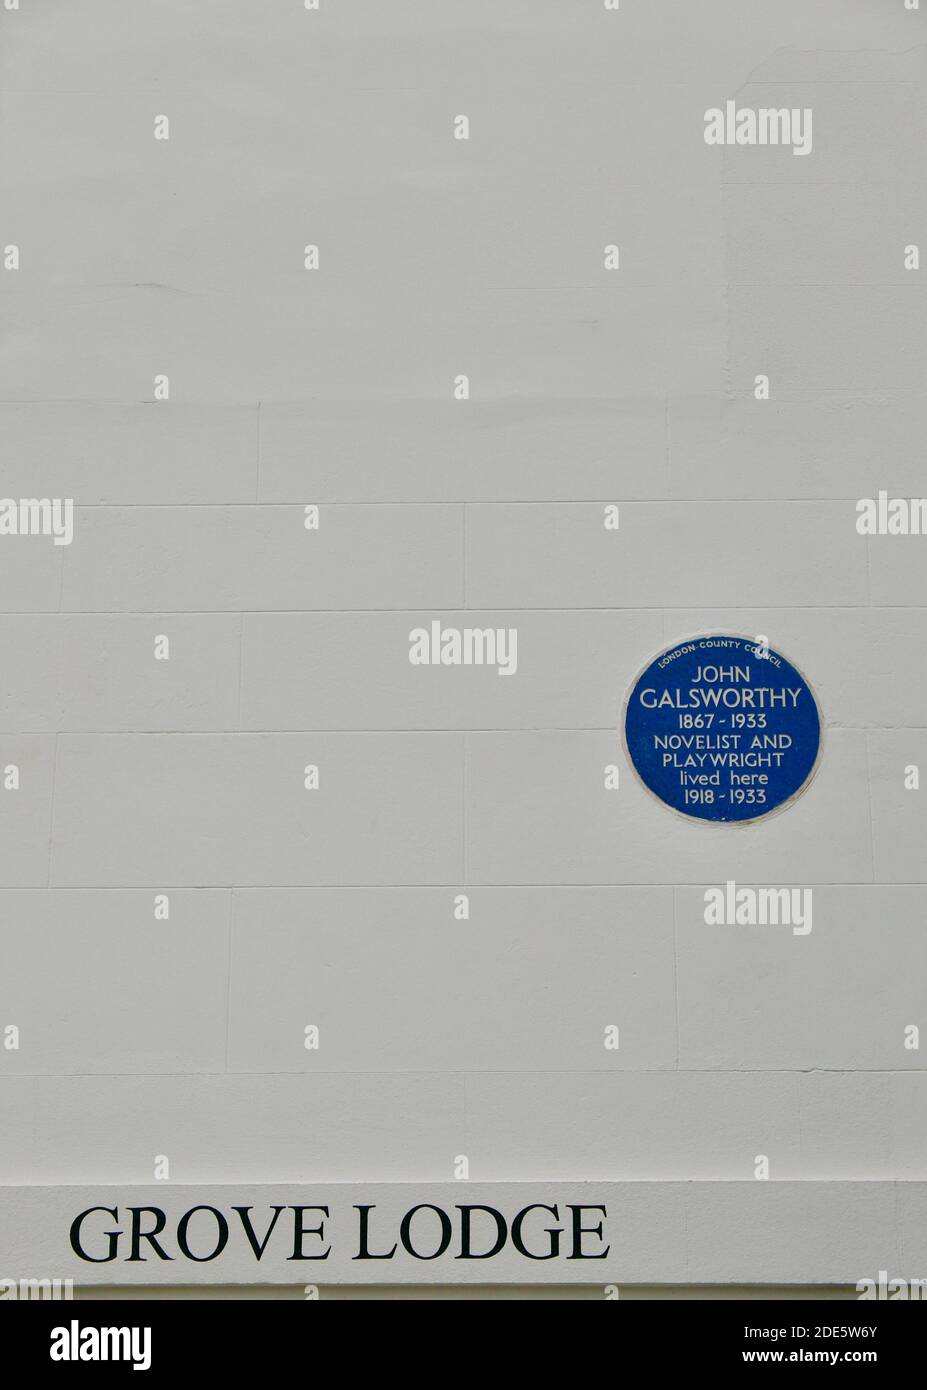 John Galsworthy, playwright and novelist, blue plaque by English Heritage depicting where he lived in Grove Lodge, Hampstead Village, London. Stock Photo